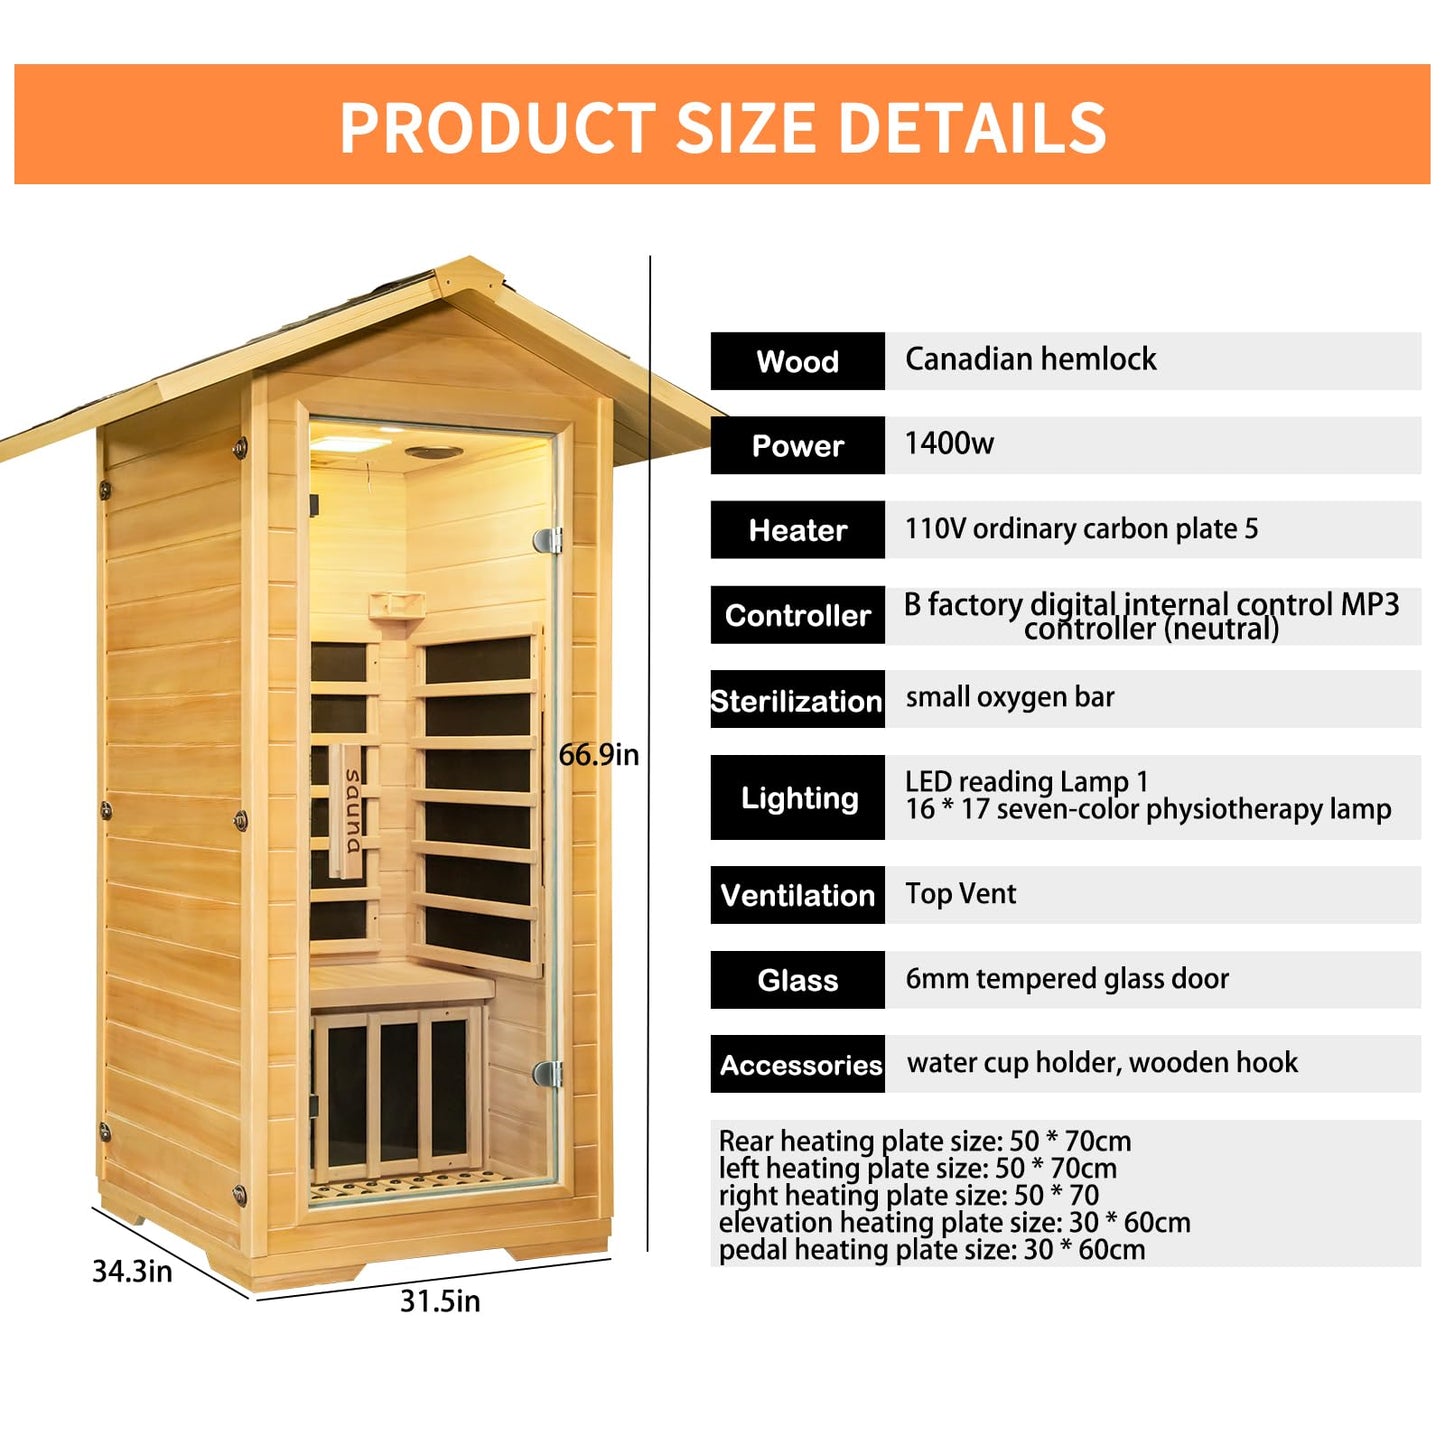 Zugoni 1 Person Outdoor Far Infrared Sauna，Canadian Hemlock Wood Home Indoor Sauna 1400W Dry Sauna Personal Room with Bluetooth Speakers, LED Lamp,